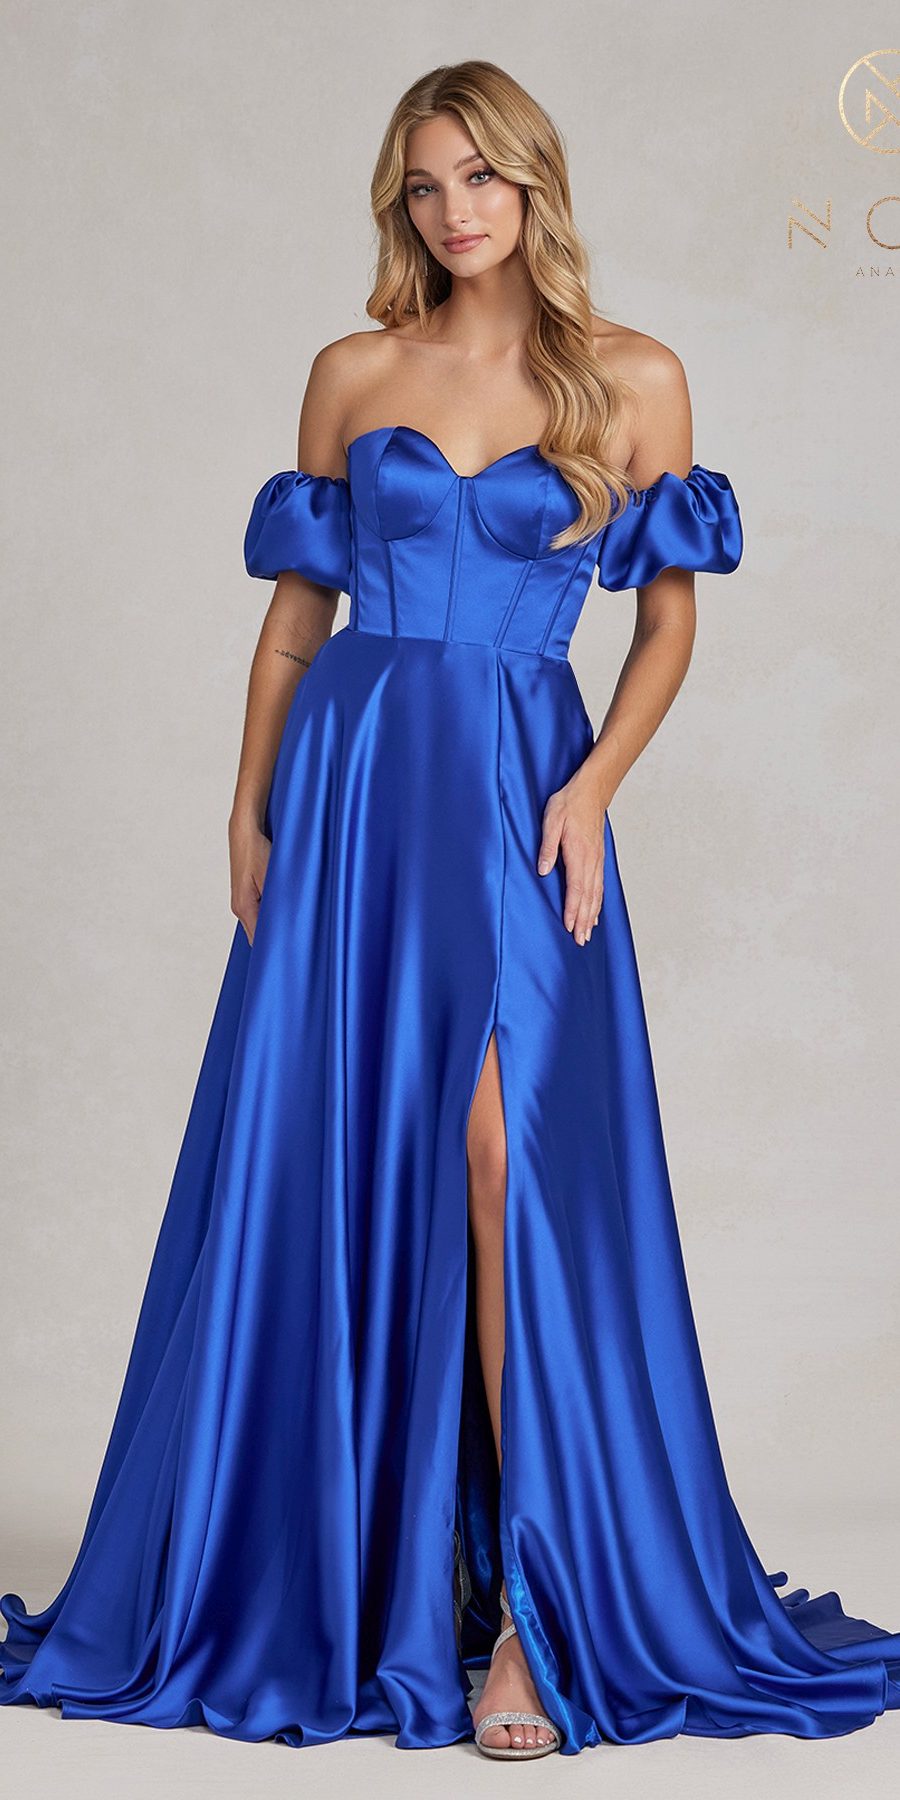 Nox Anabel K1122 Floor Length A-line Satin Gown with Detachable Puff  Sleeves - Royal Blue / 00